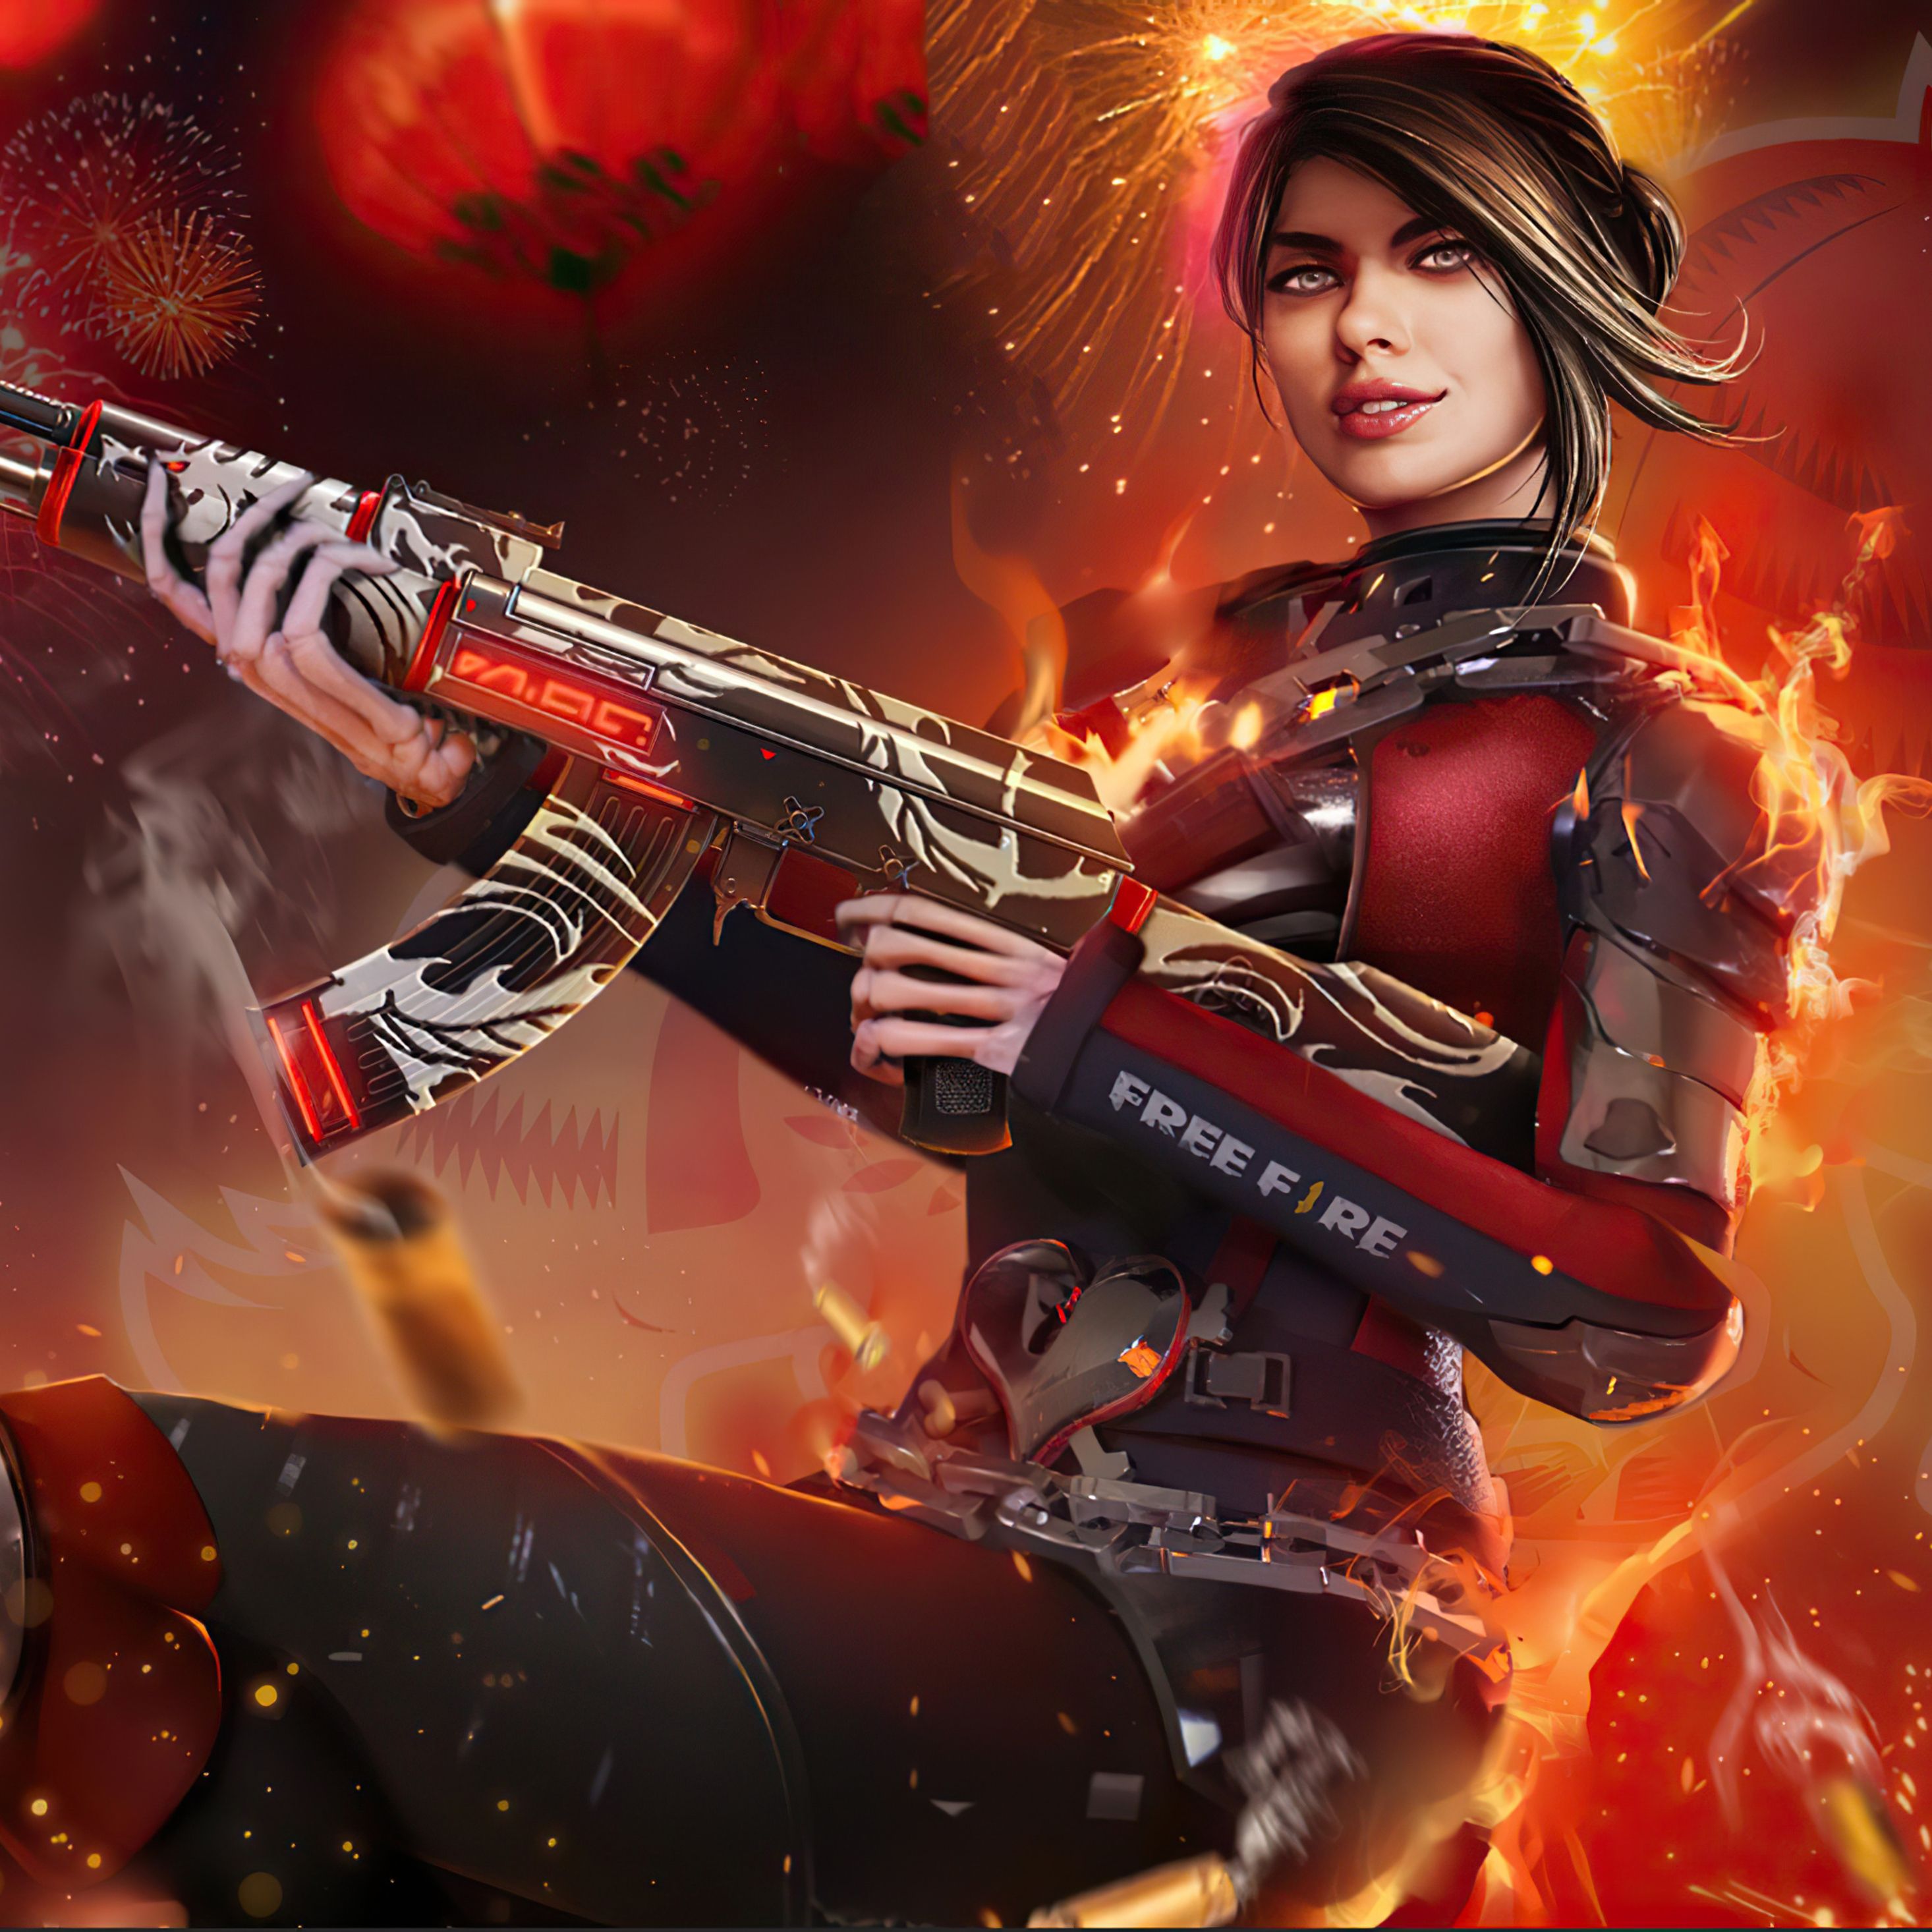 Garena Free Fire 4k Game 2020 iPad Pro Retina Display HD 4k Wallpaper, Image, Background, Photo and Picture